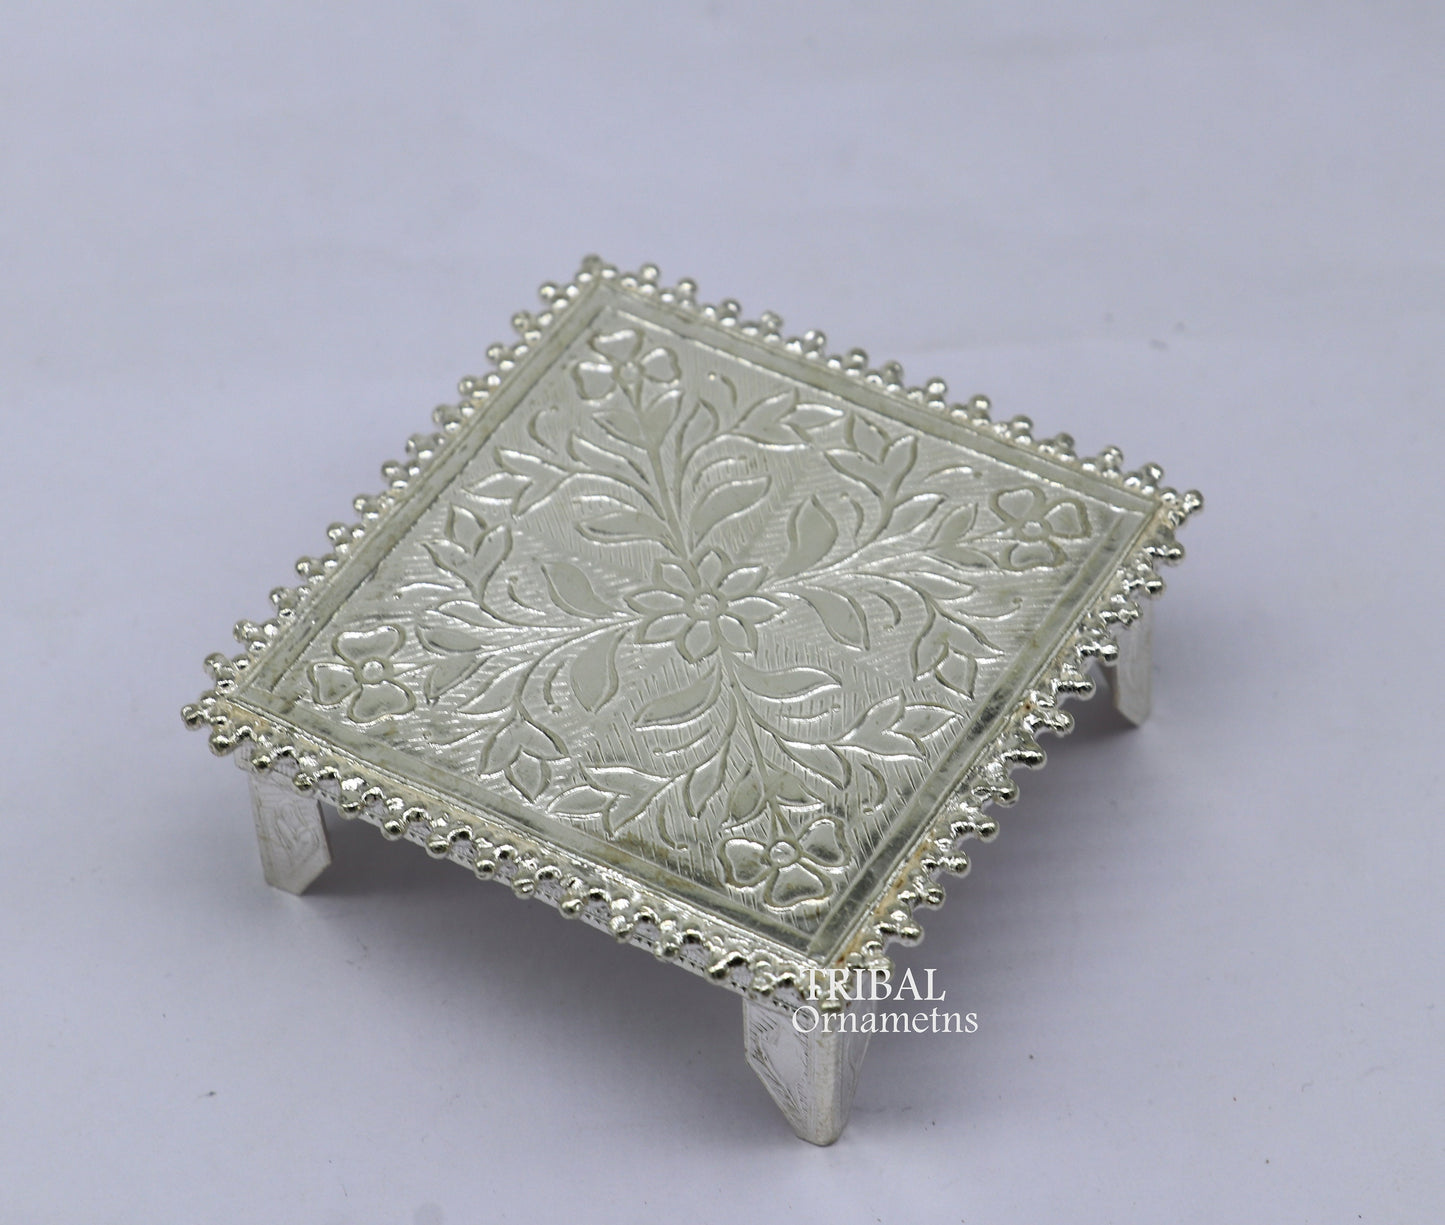 2.5" Vintage design Sterling silver handmade customize small square shape table/bazot/chouki, excellent home puja utensils temple art su951 - TRIBAL ORNAMENTS